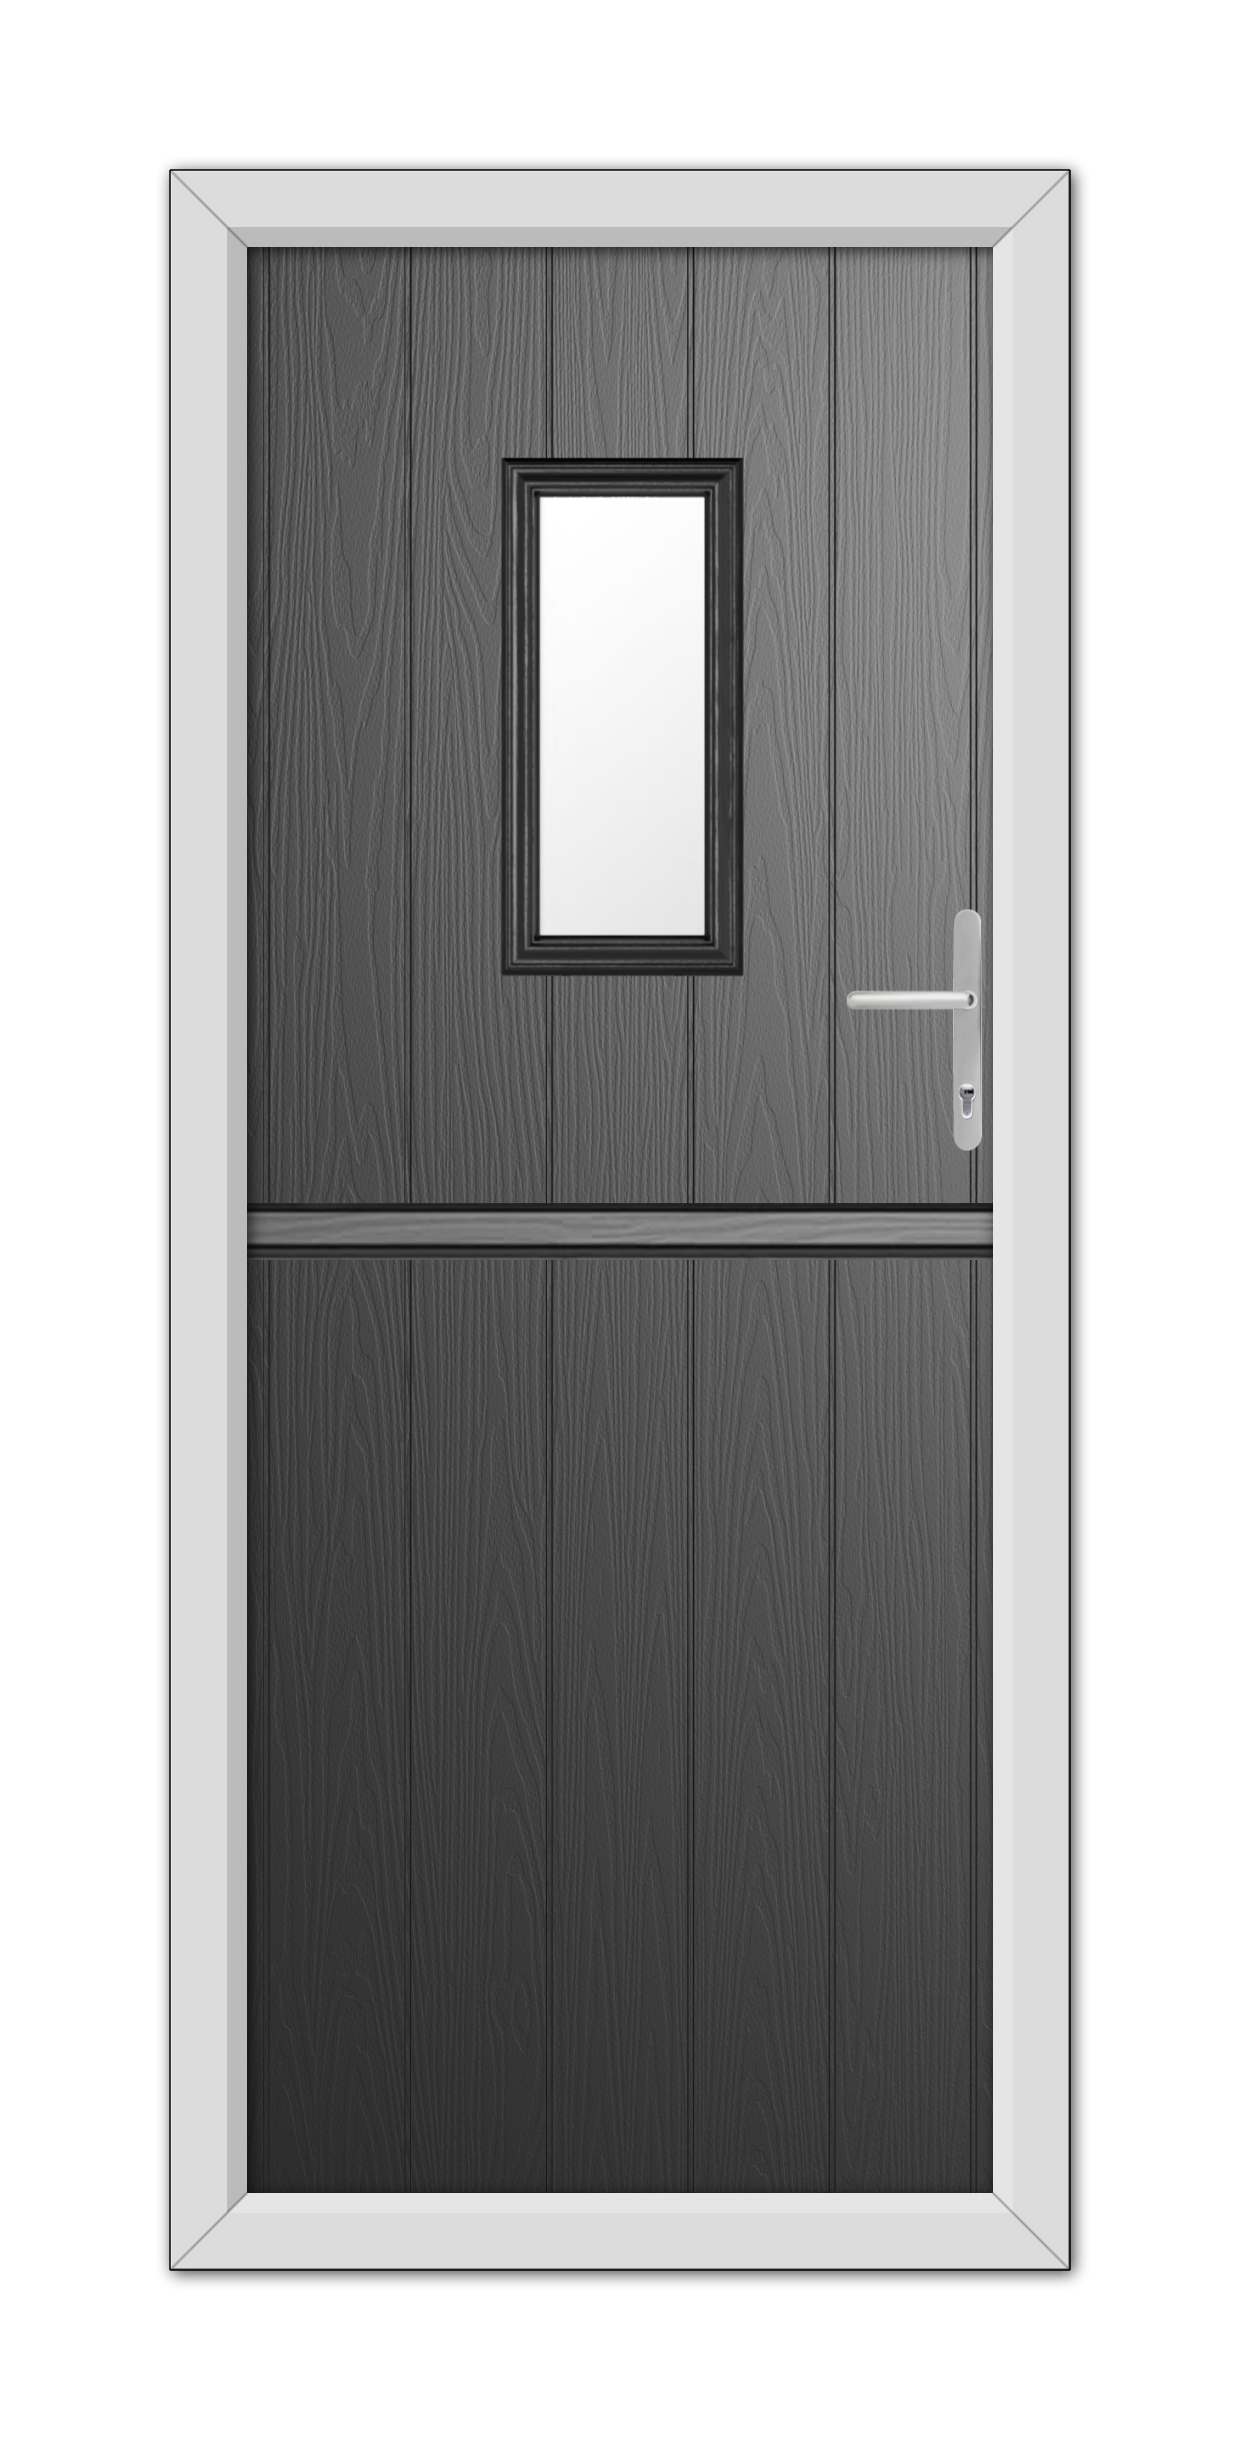 A Black Somerset Stable Composite Door 48mm Timber Core with a small square window at the top and a metallic handle, set within a light gray frame.